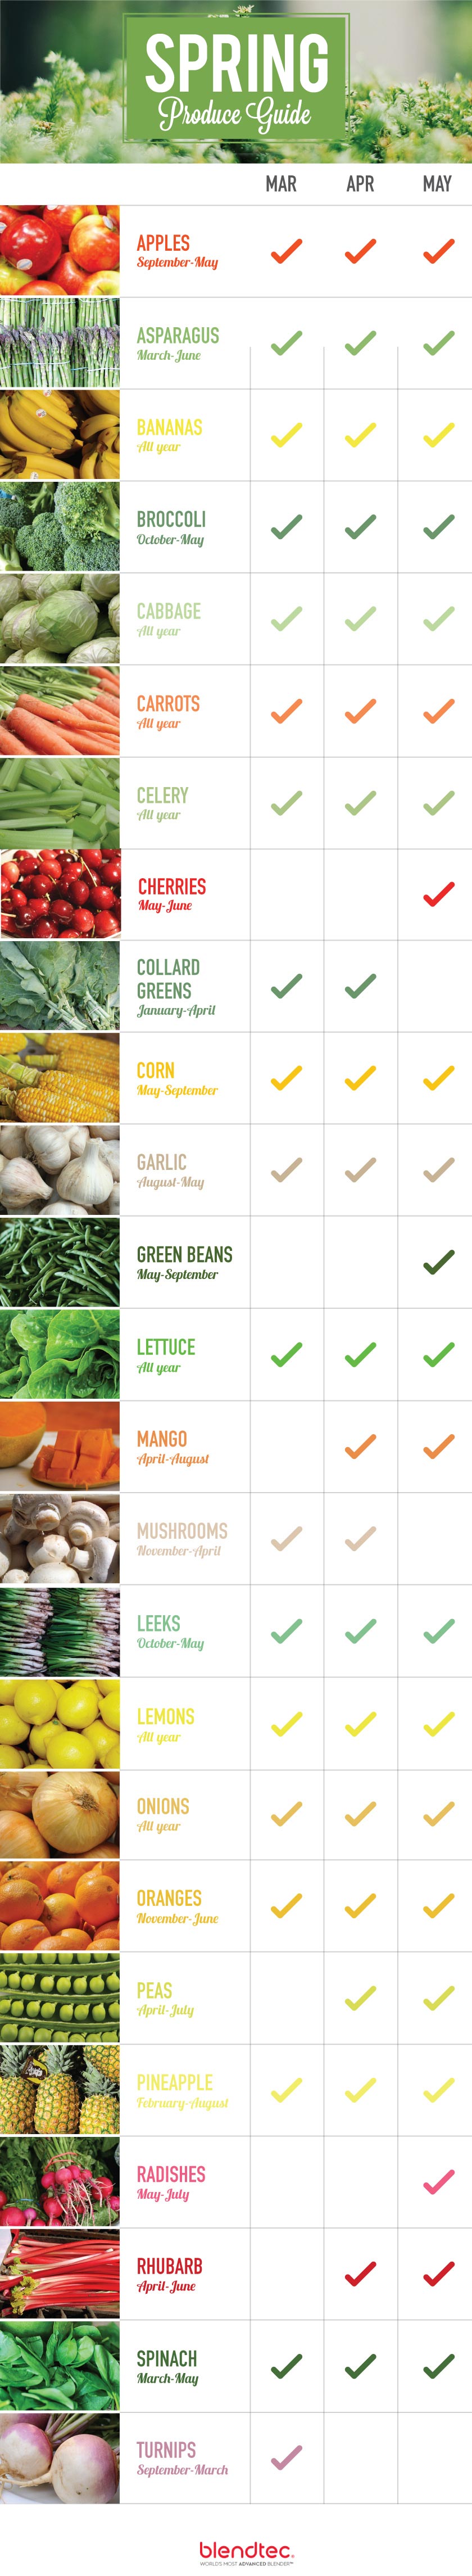 Spring produce guide